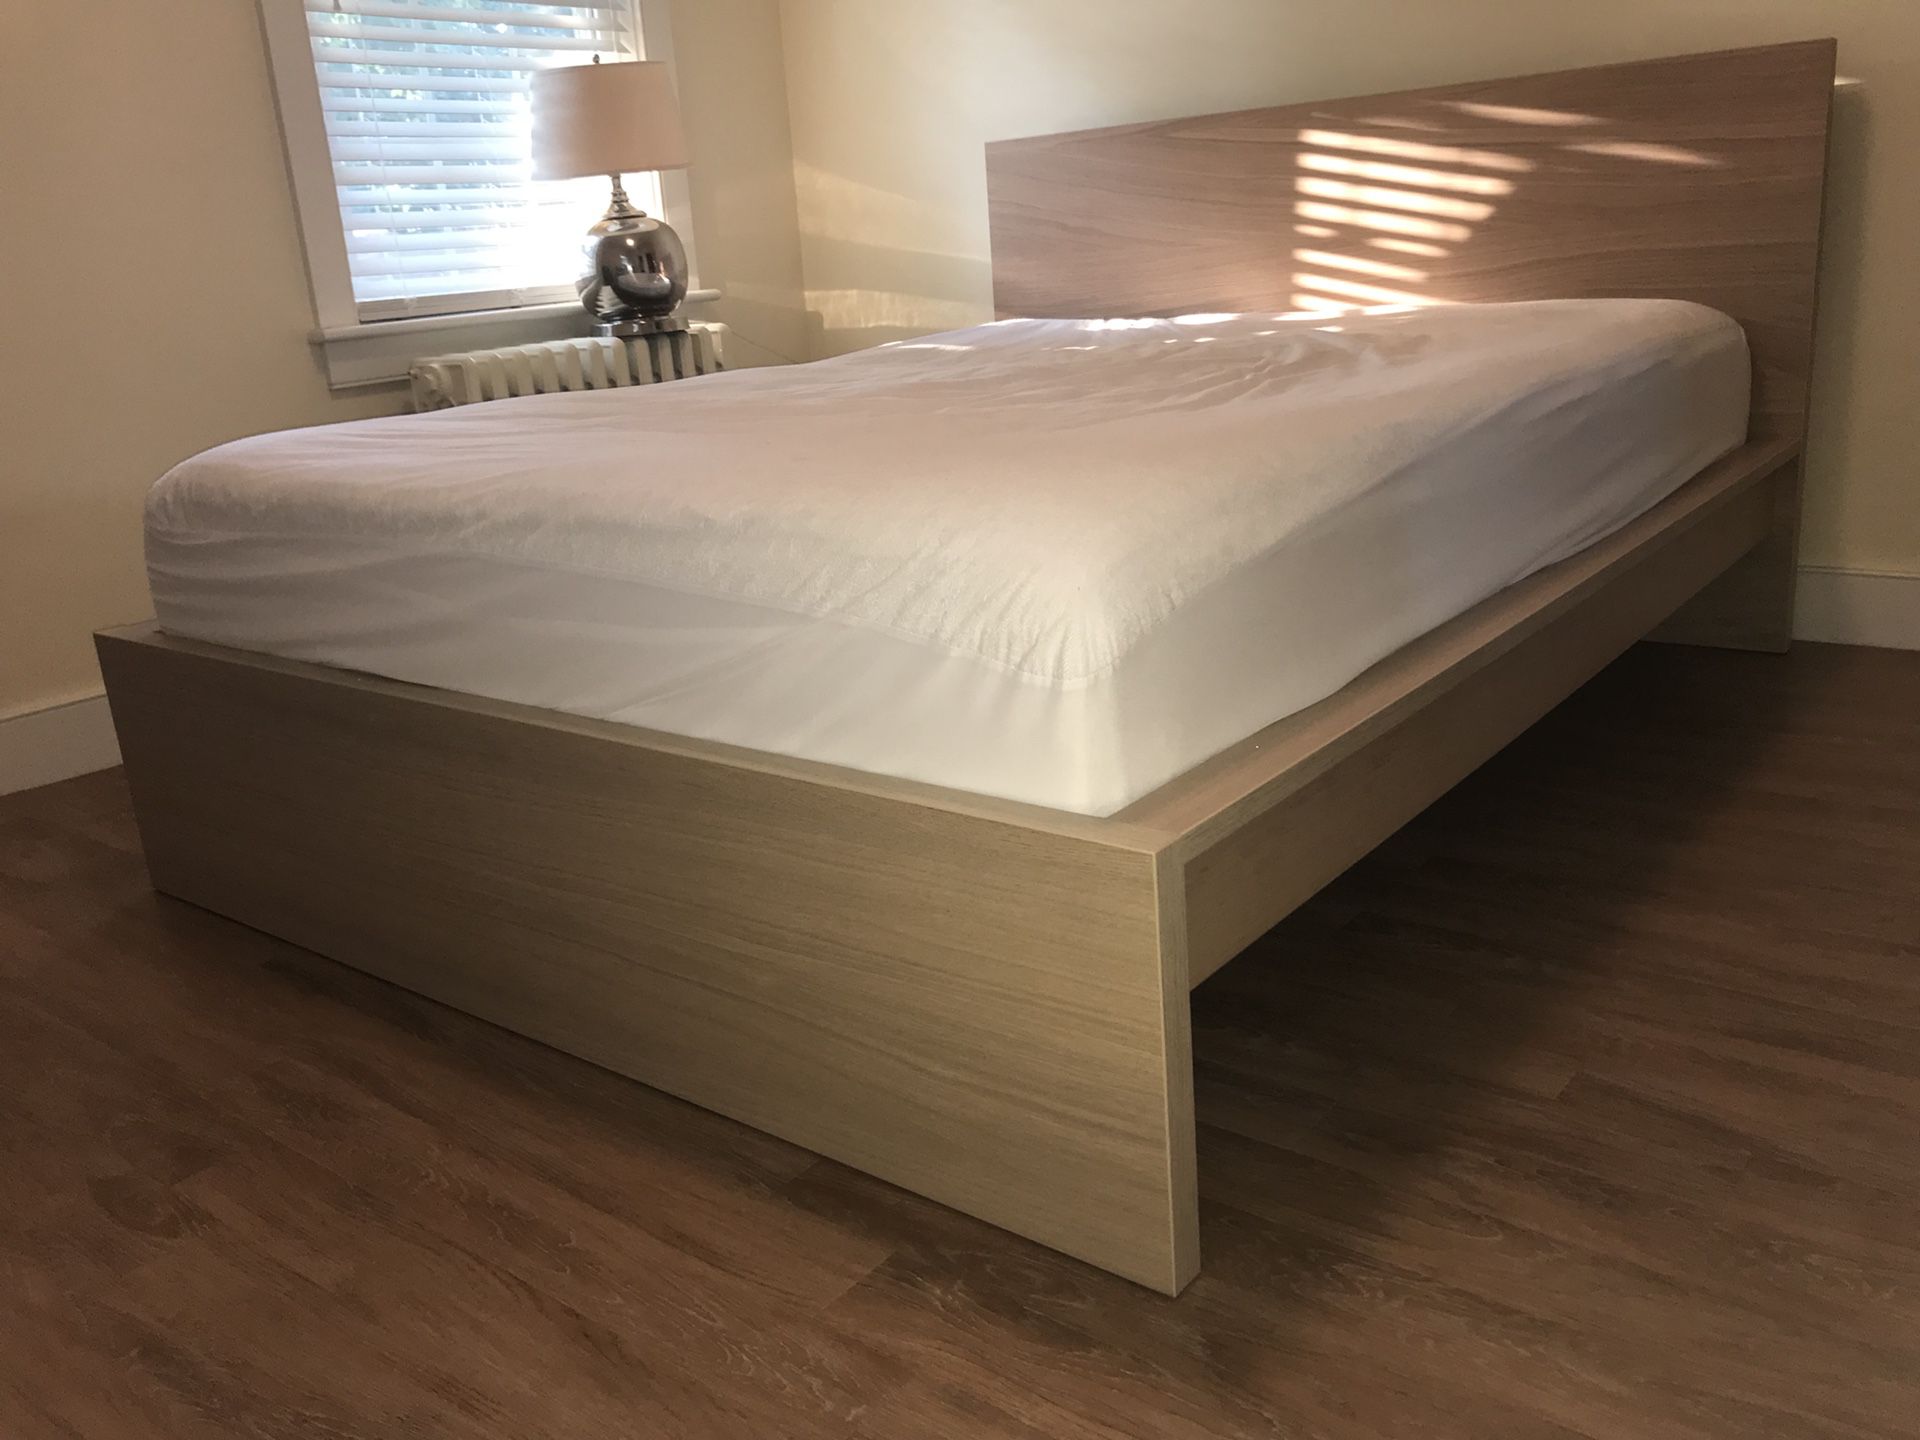 IKEA Malm QUEEN bed frame and supports